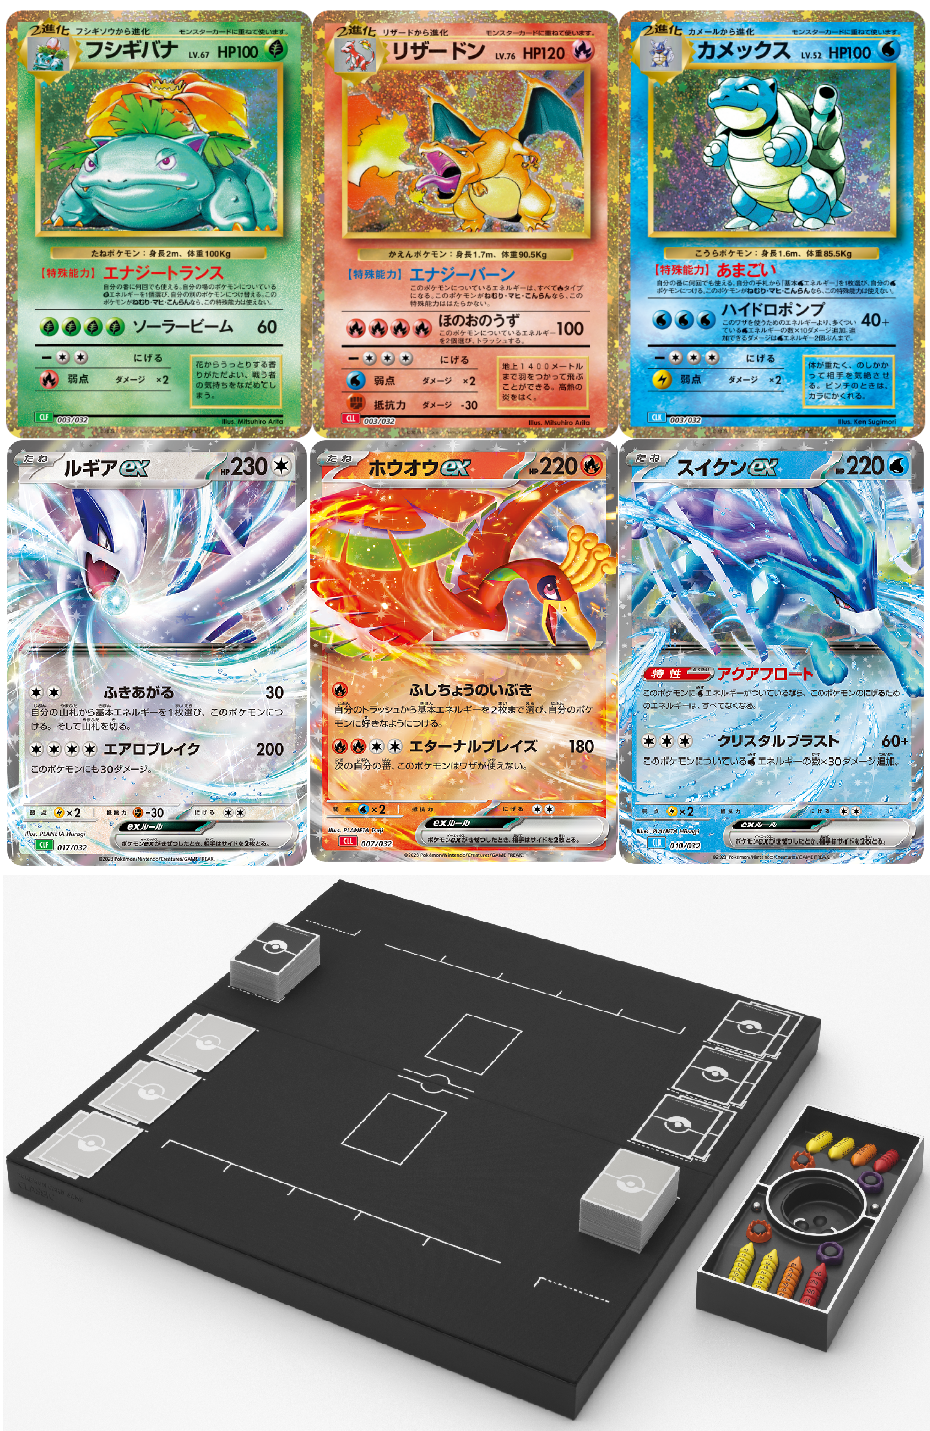 Pokemon Trading Card Game Classic" Box Set Announced for Fall, Features New and Classic Cards! - | Forums